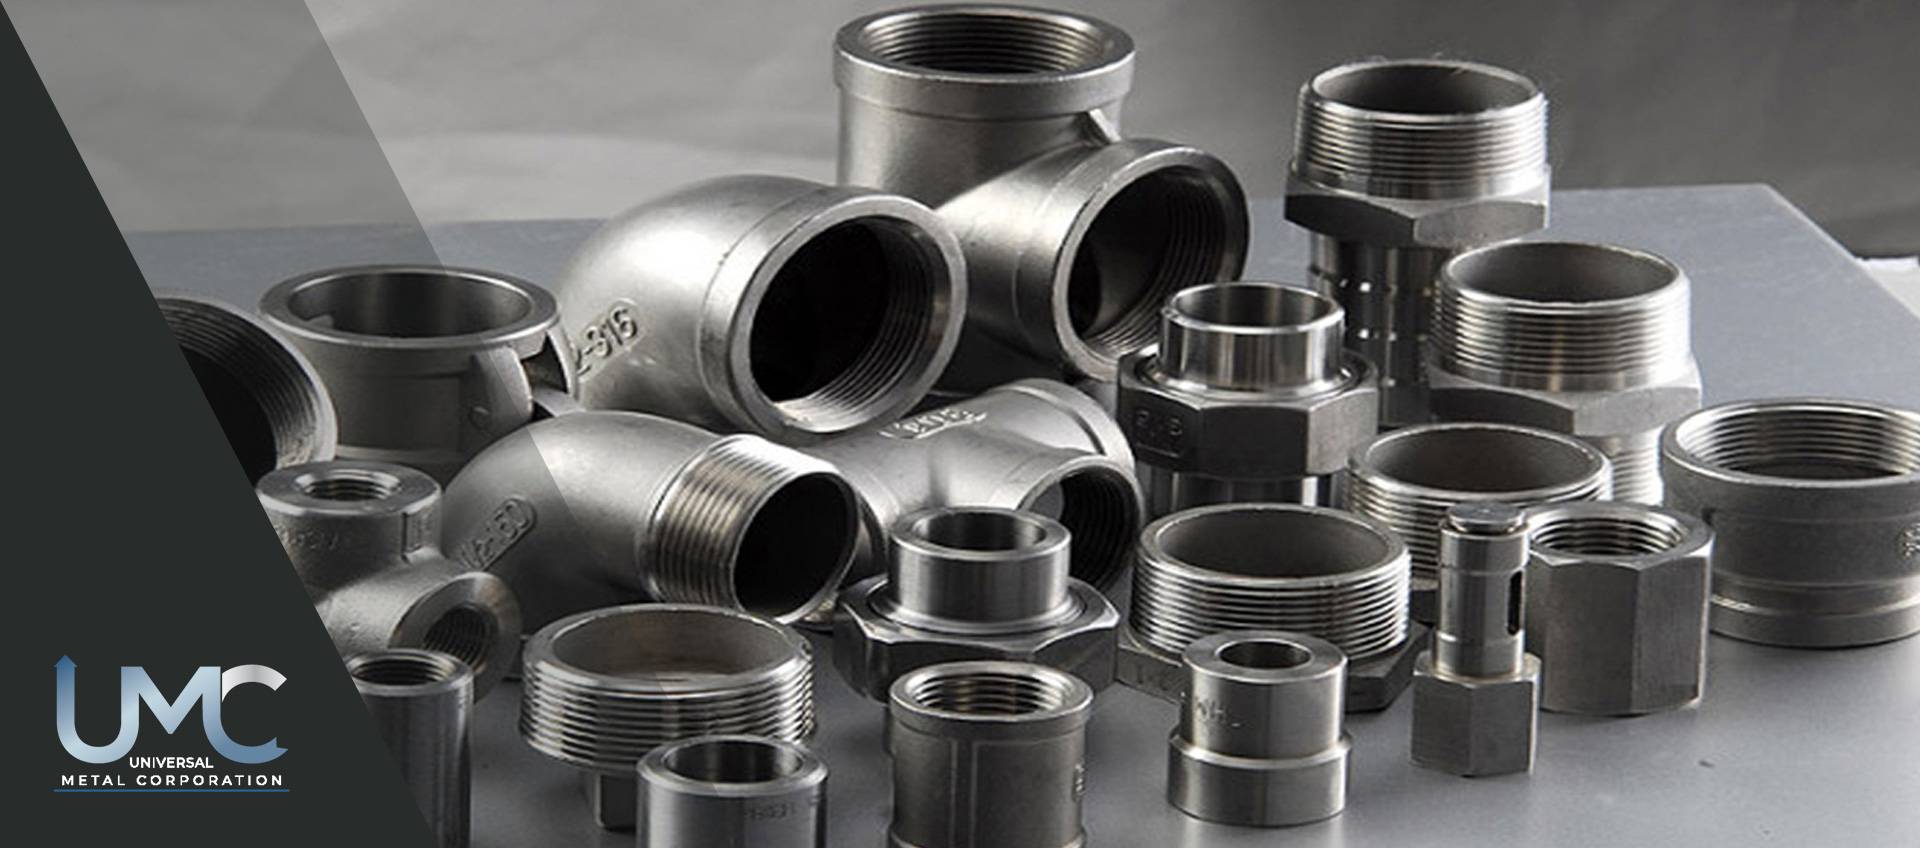 Monel K500 Forged Fittings